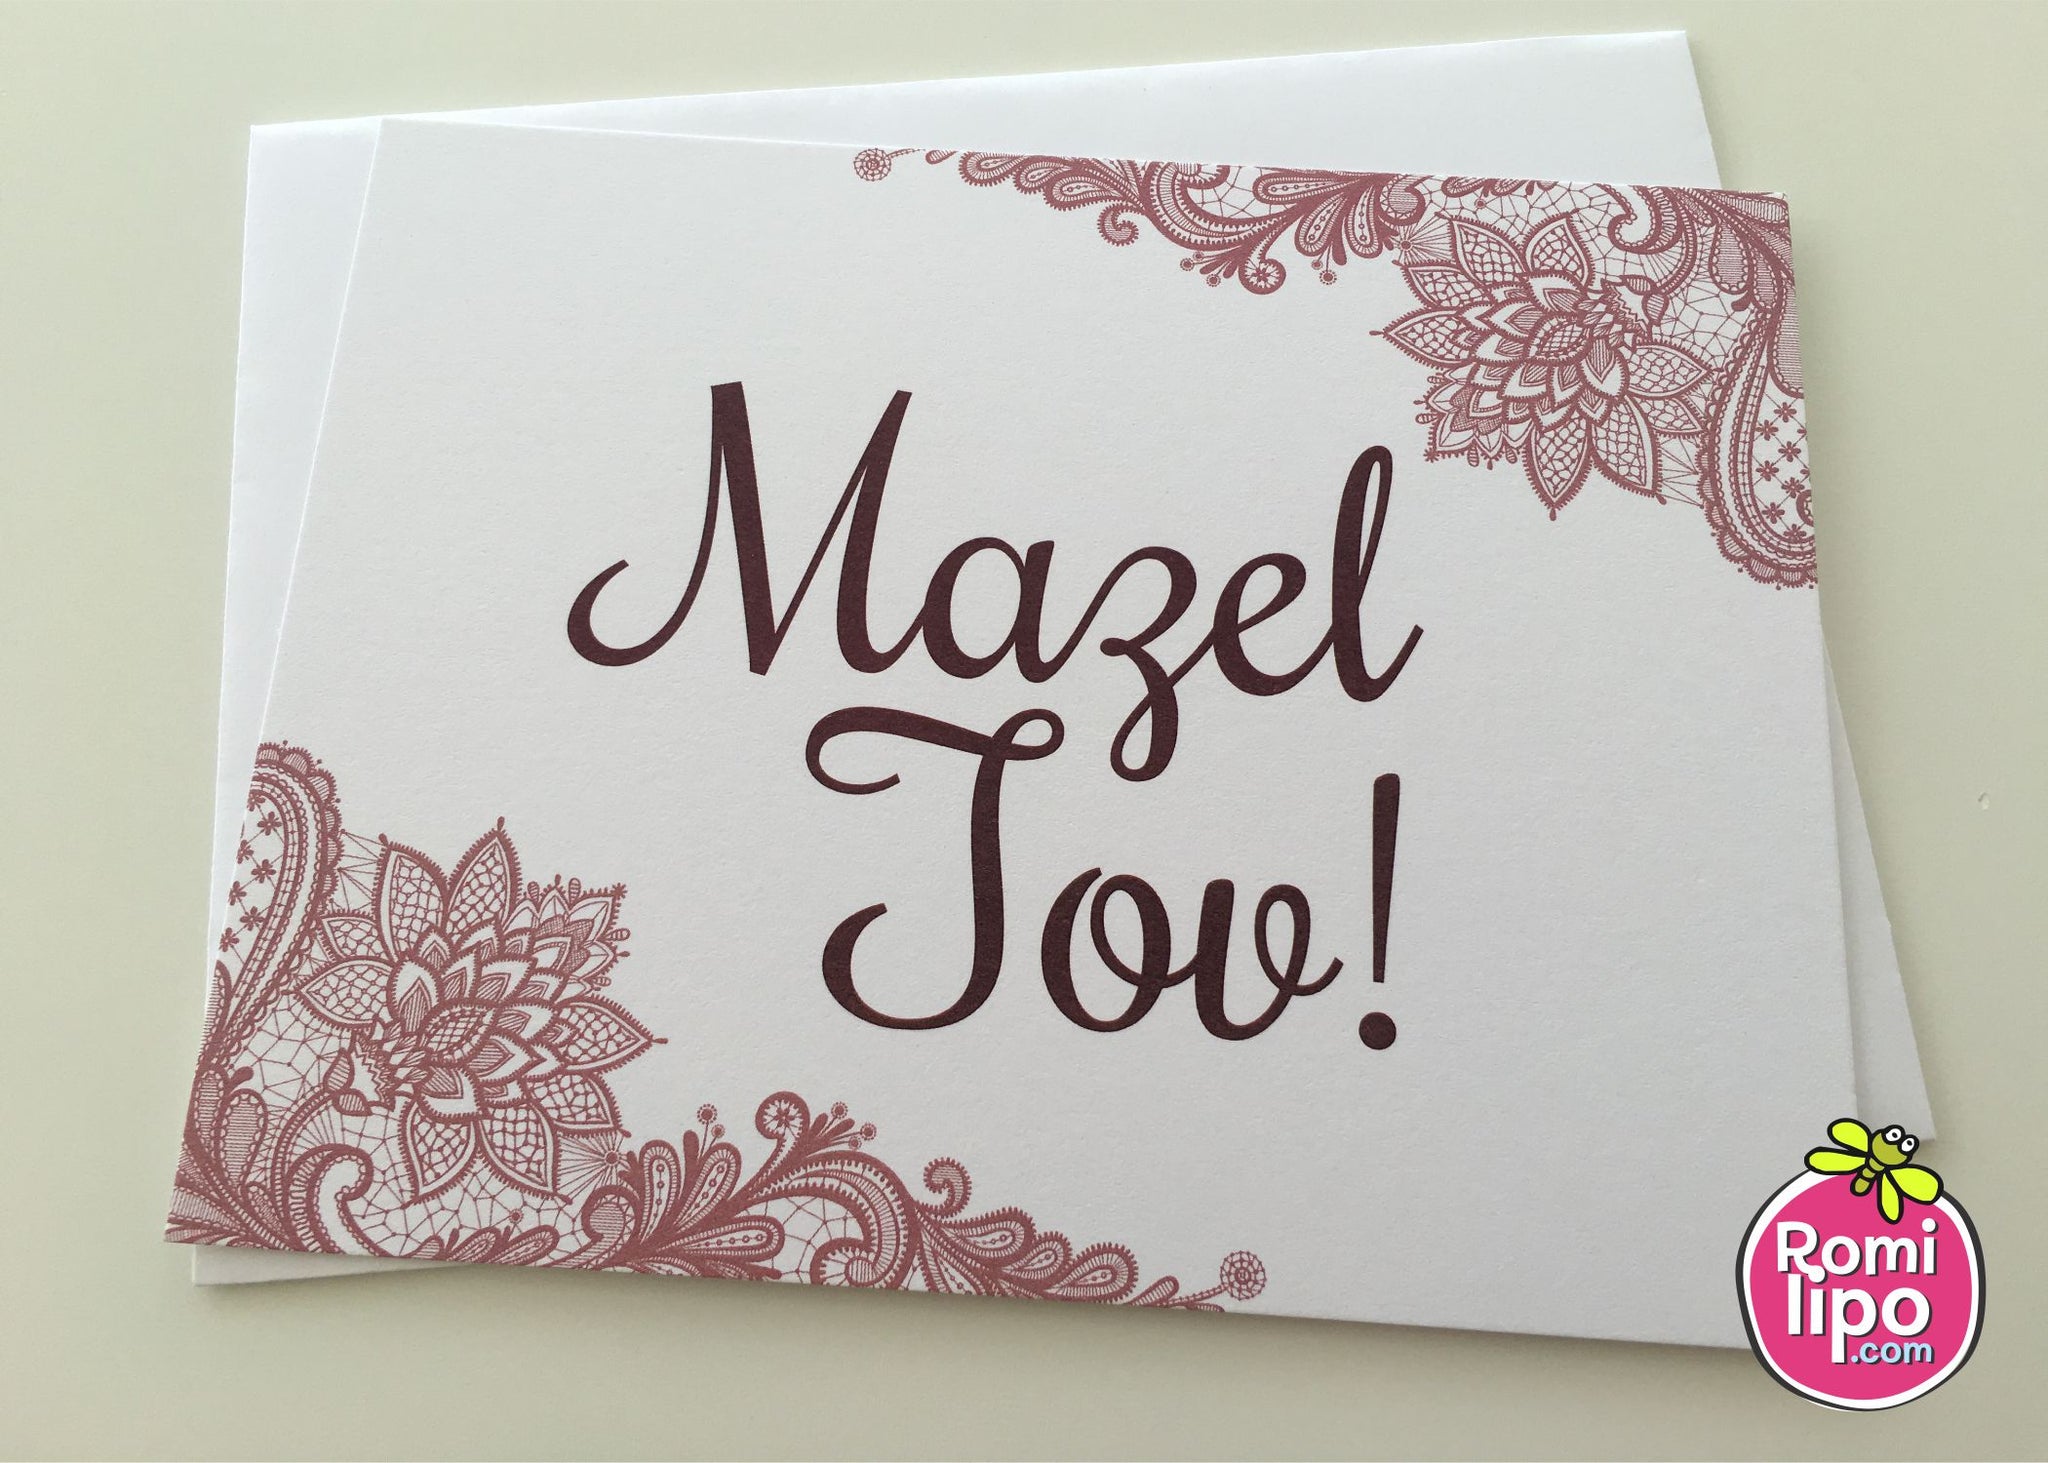 Mazel tov cards with matching envelopes - Classic 2